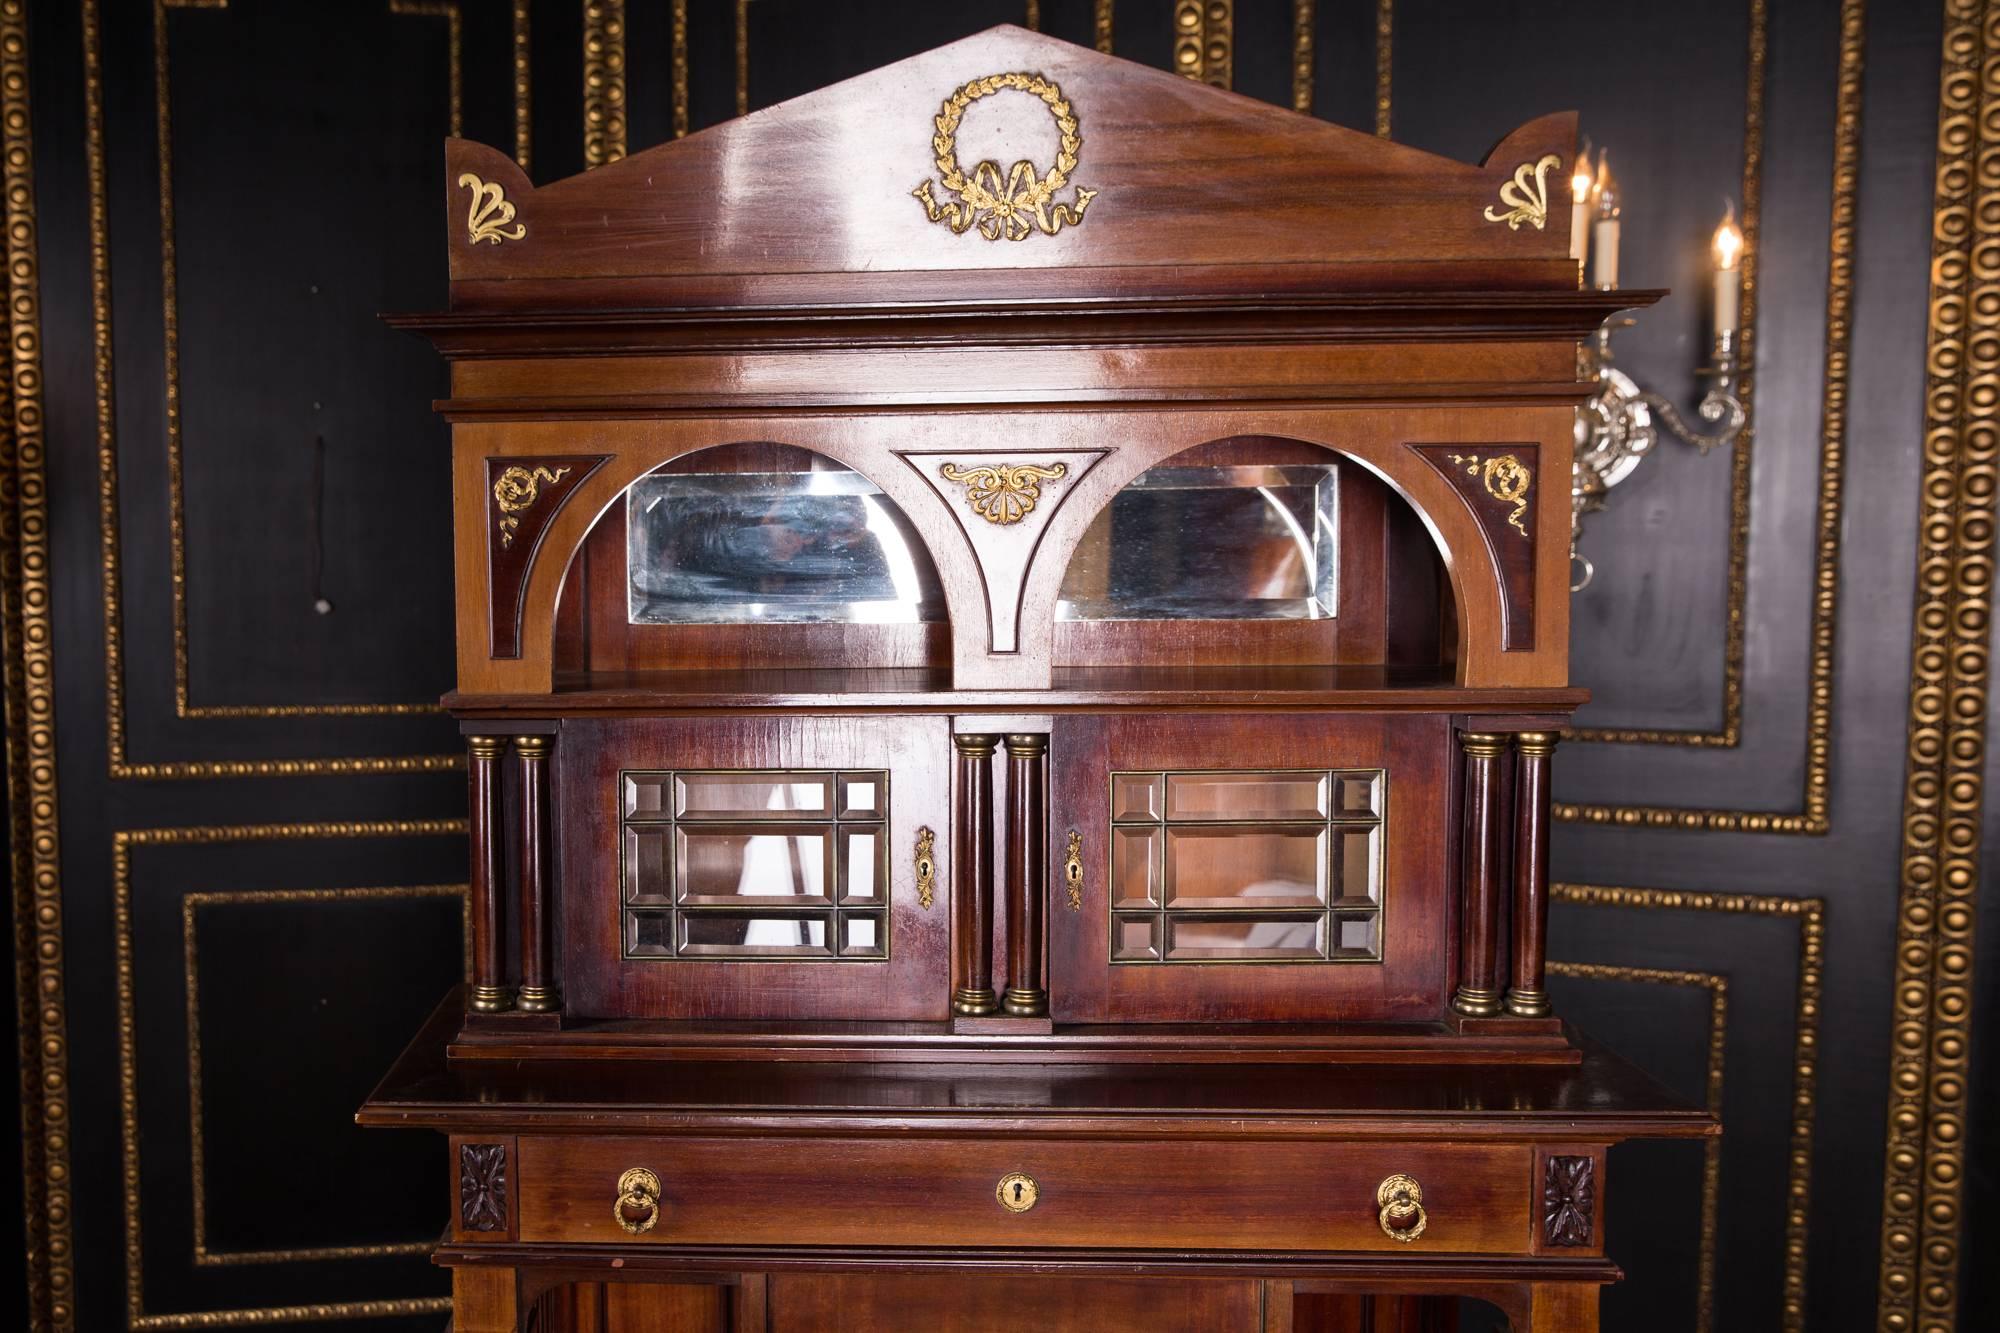 Mahogany on solid wood. High-arched, architecturally designed corpus, single-door base, open-sided shelf, flanked by columns with capitals and bases of finely chiselled bronze, slightly protruding top, including a wide drawer.

Excellent warm